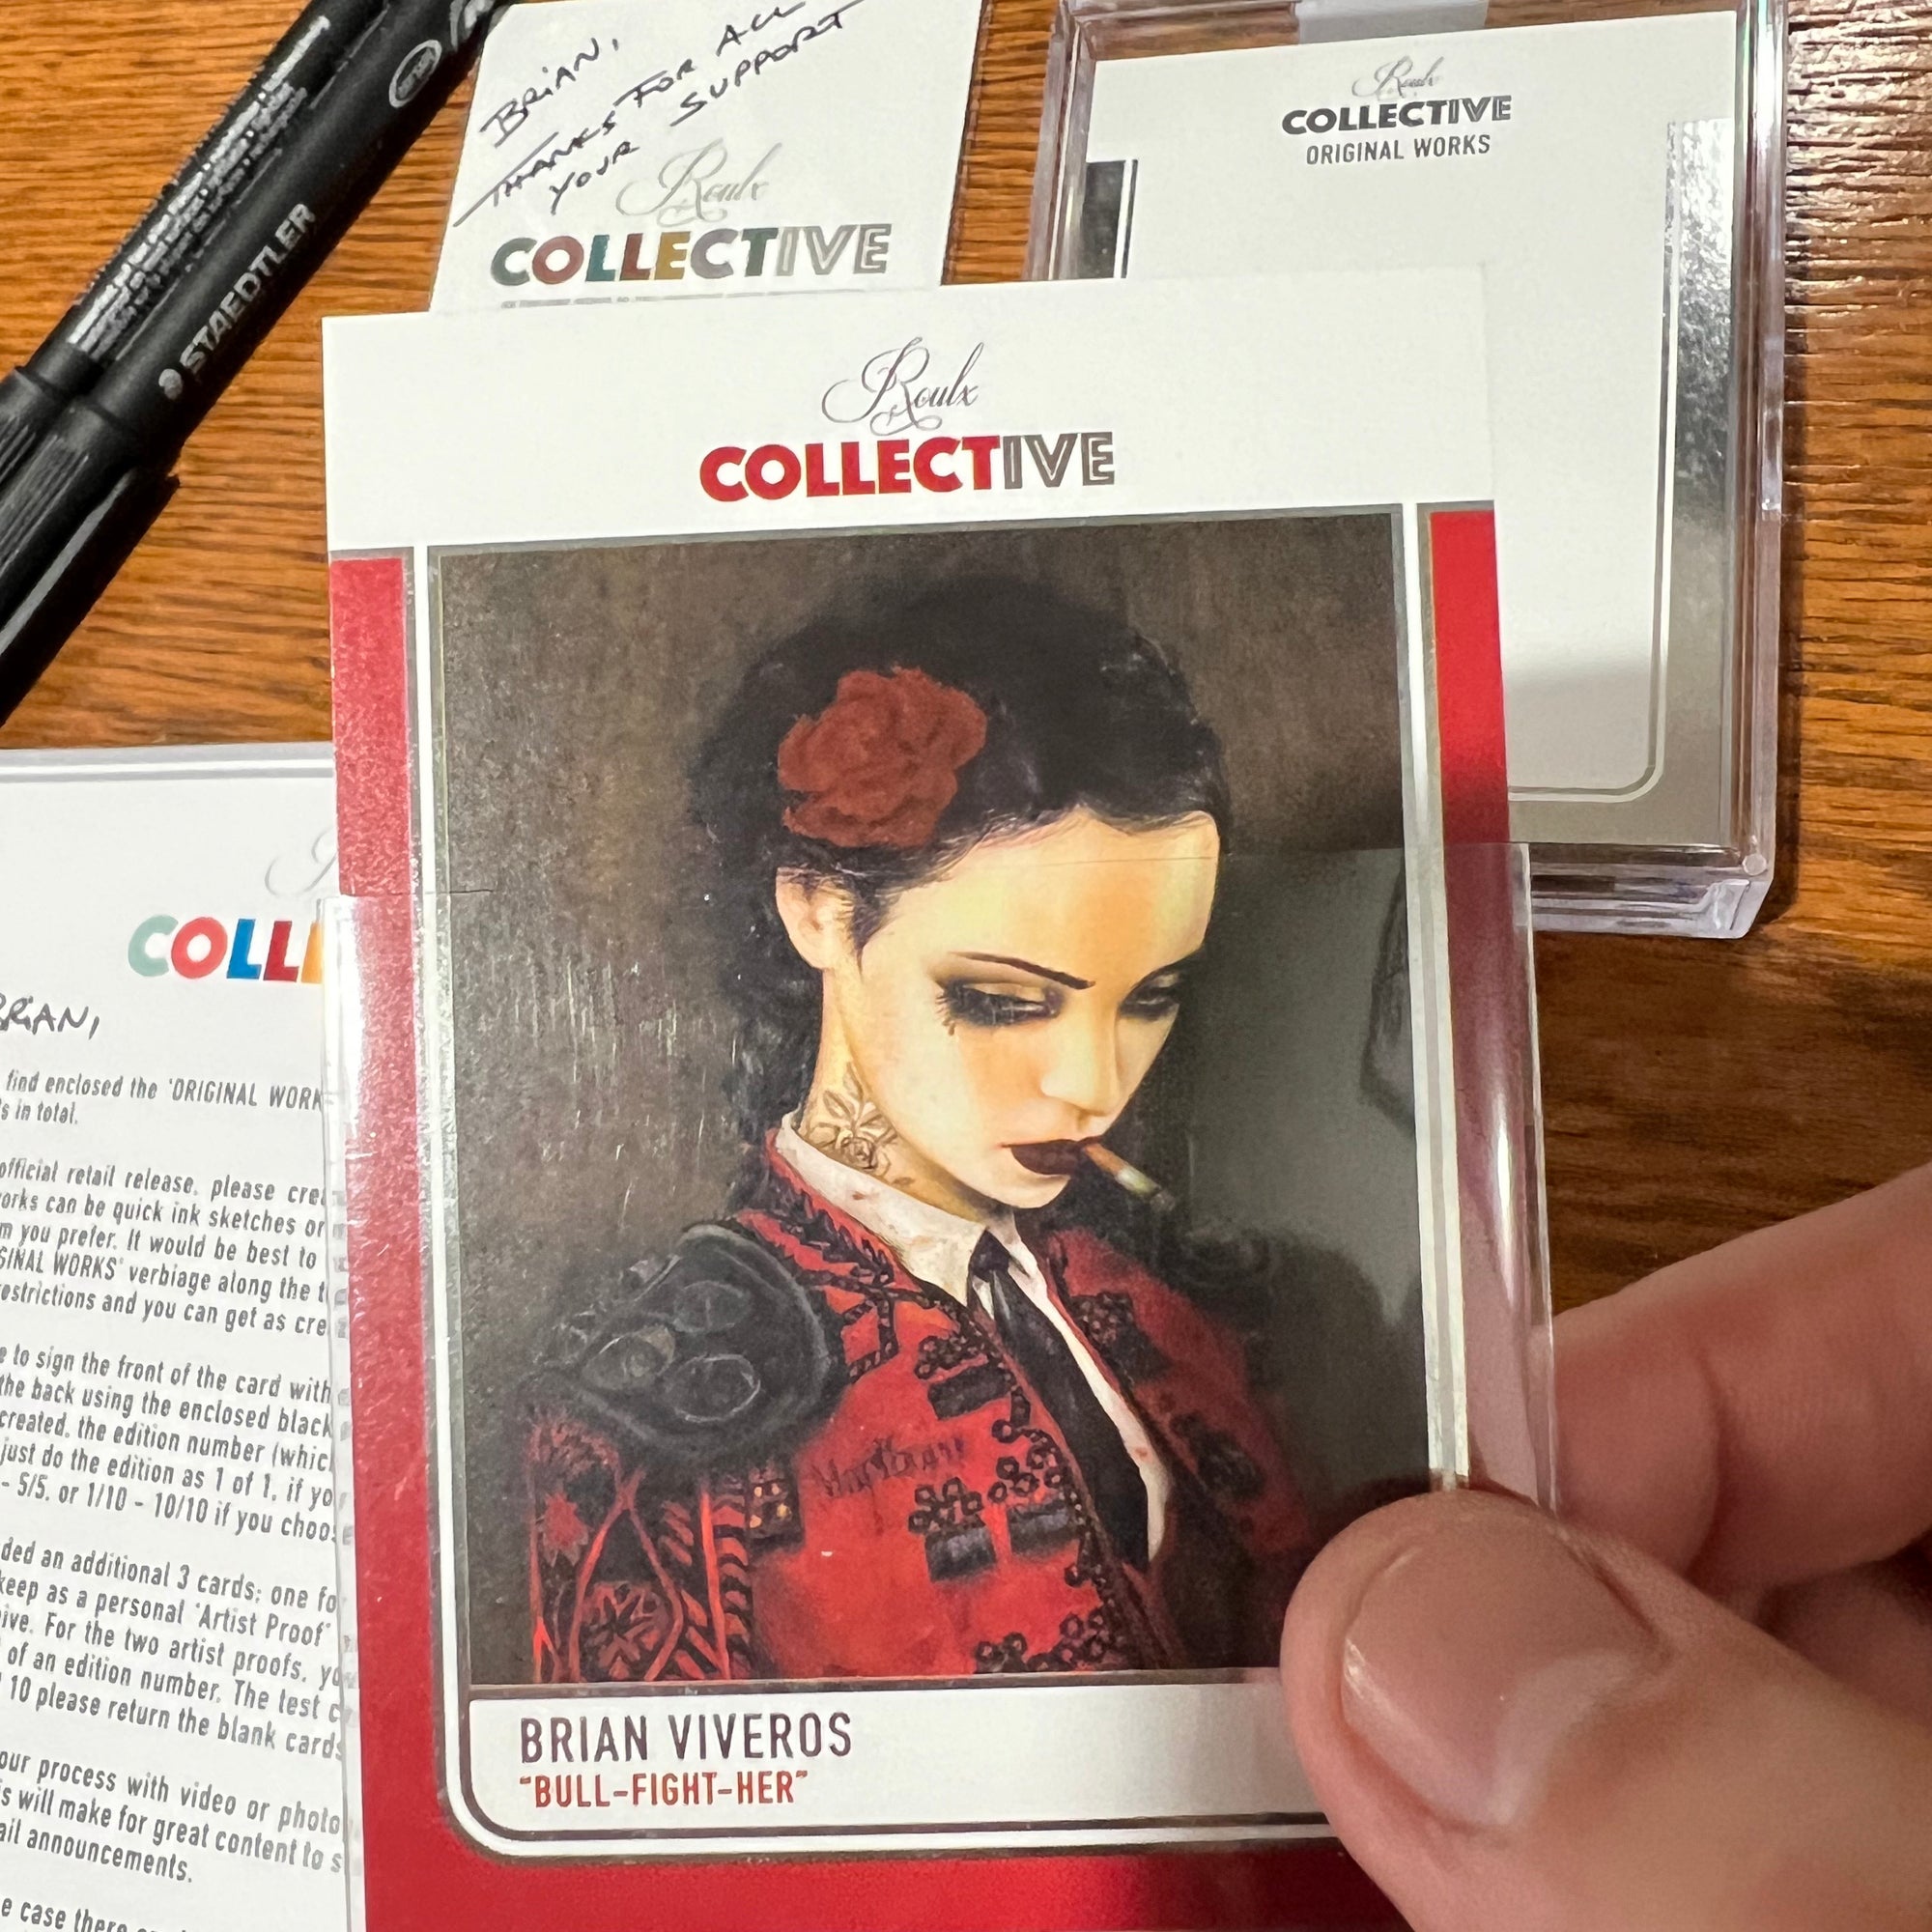 BRIAN VIVEROS' FIRST LOOK AT HIS "BULL-FIGHT-HER" CARD